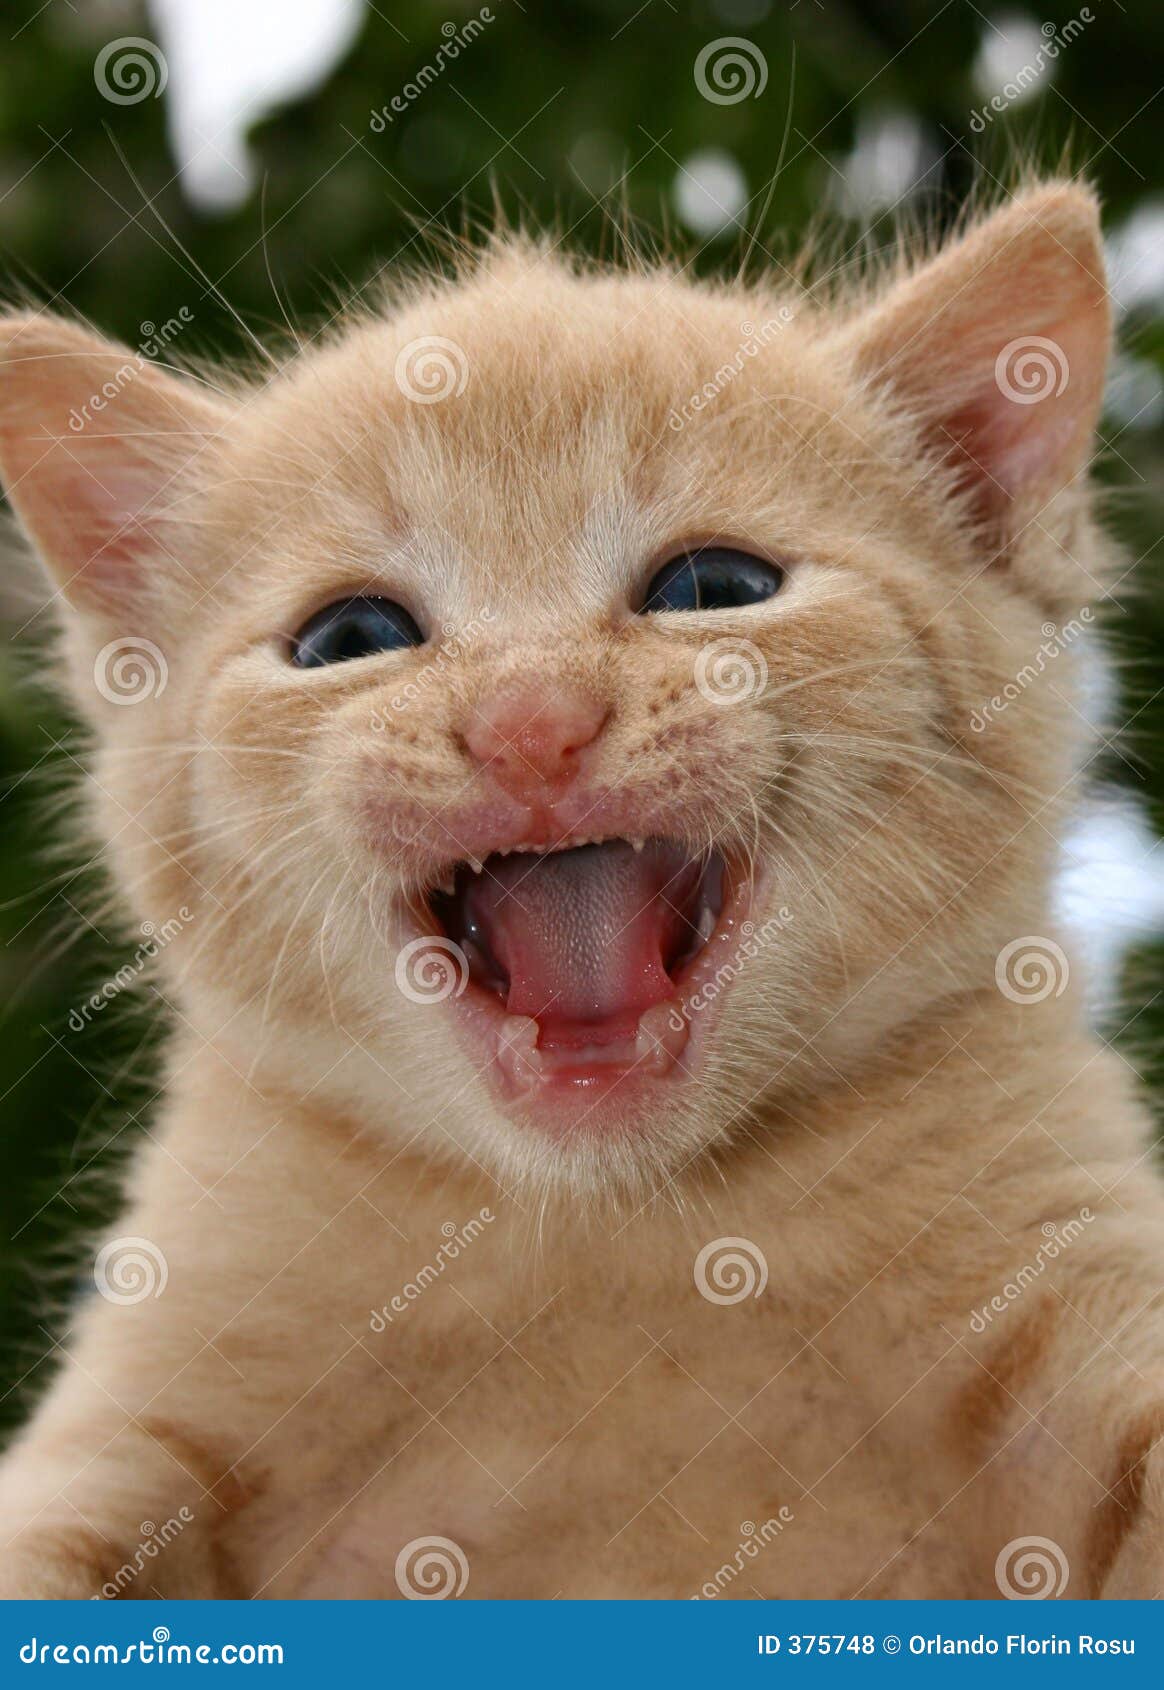 http://thumbs.dreamstime.com/z/angry-cat-375748.jpg